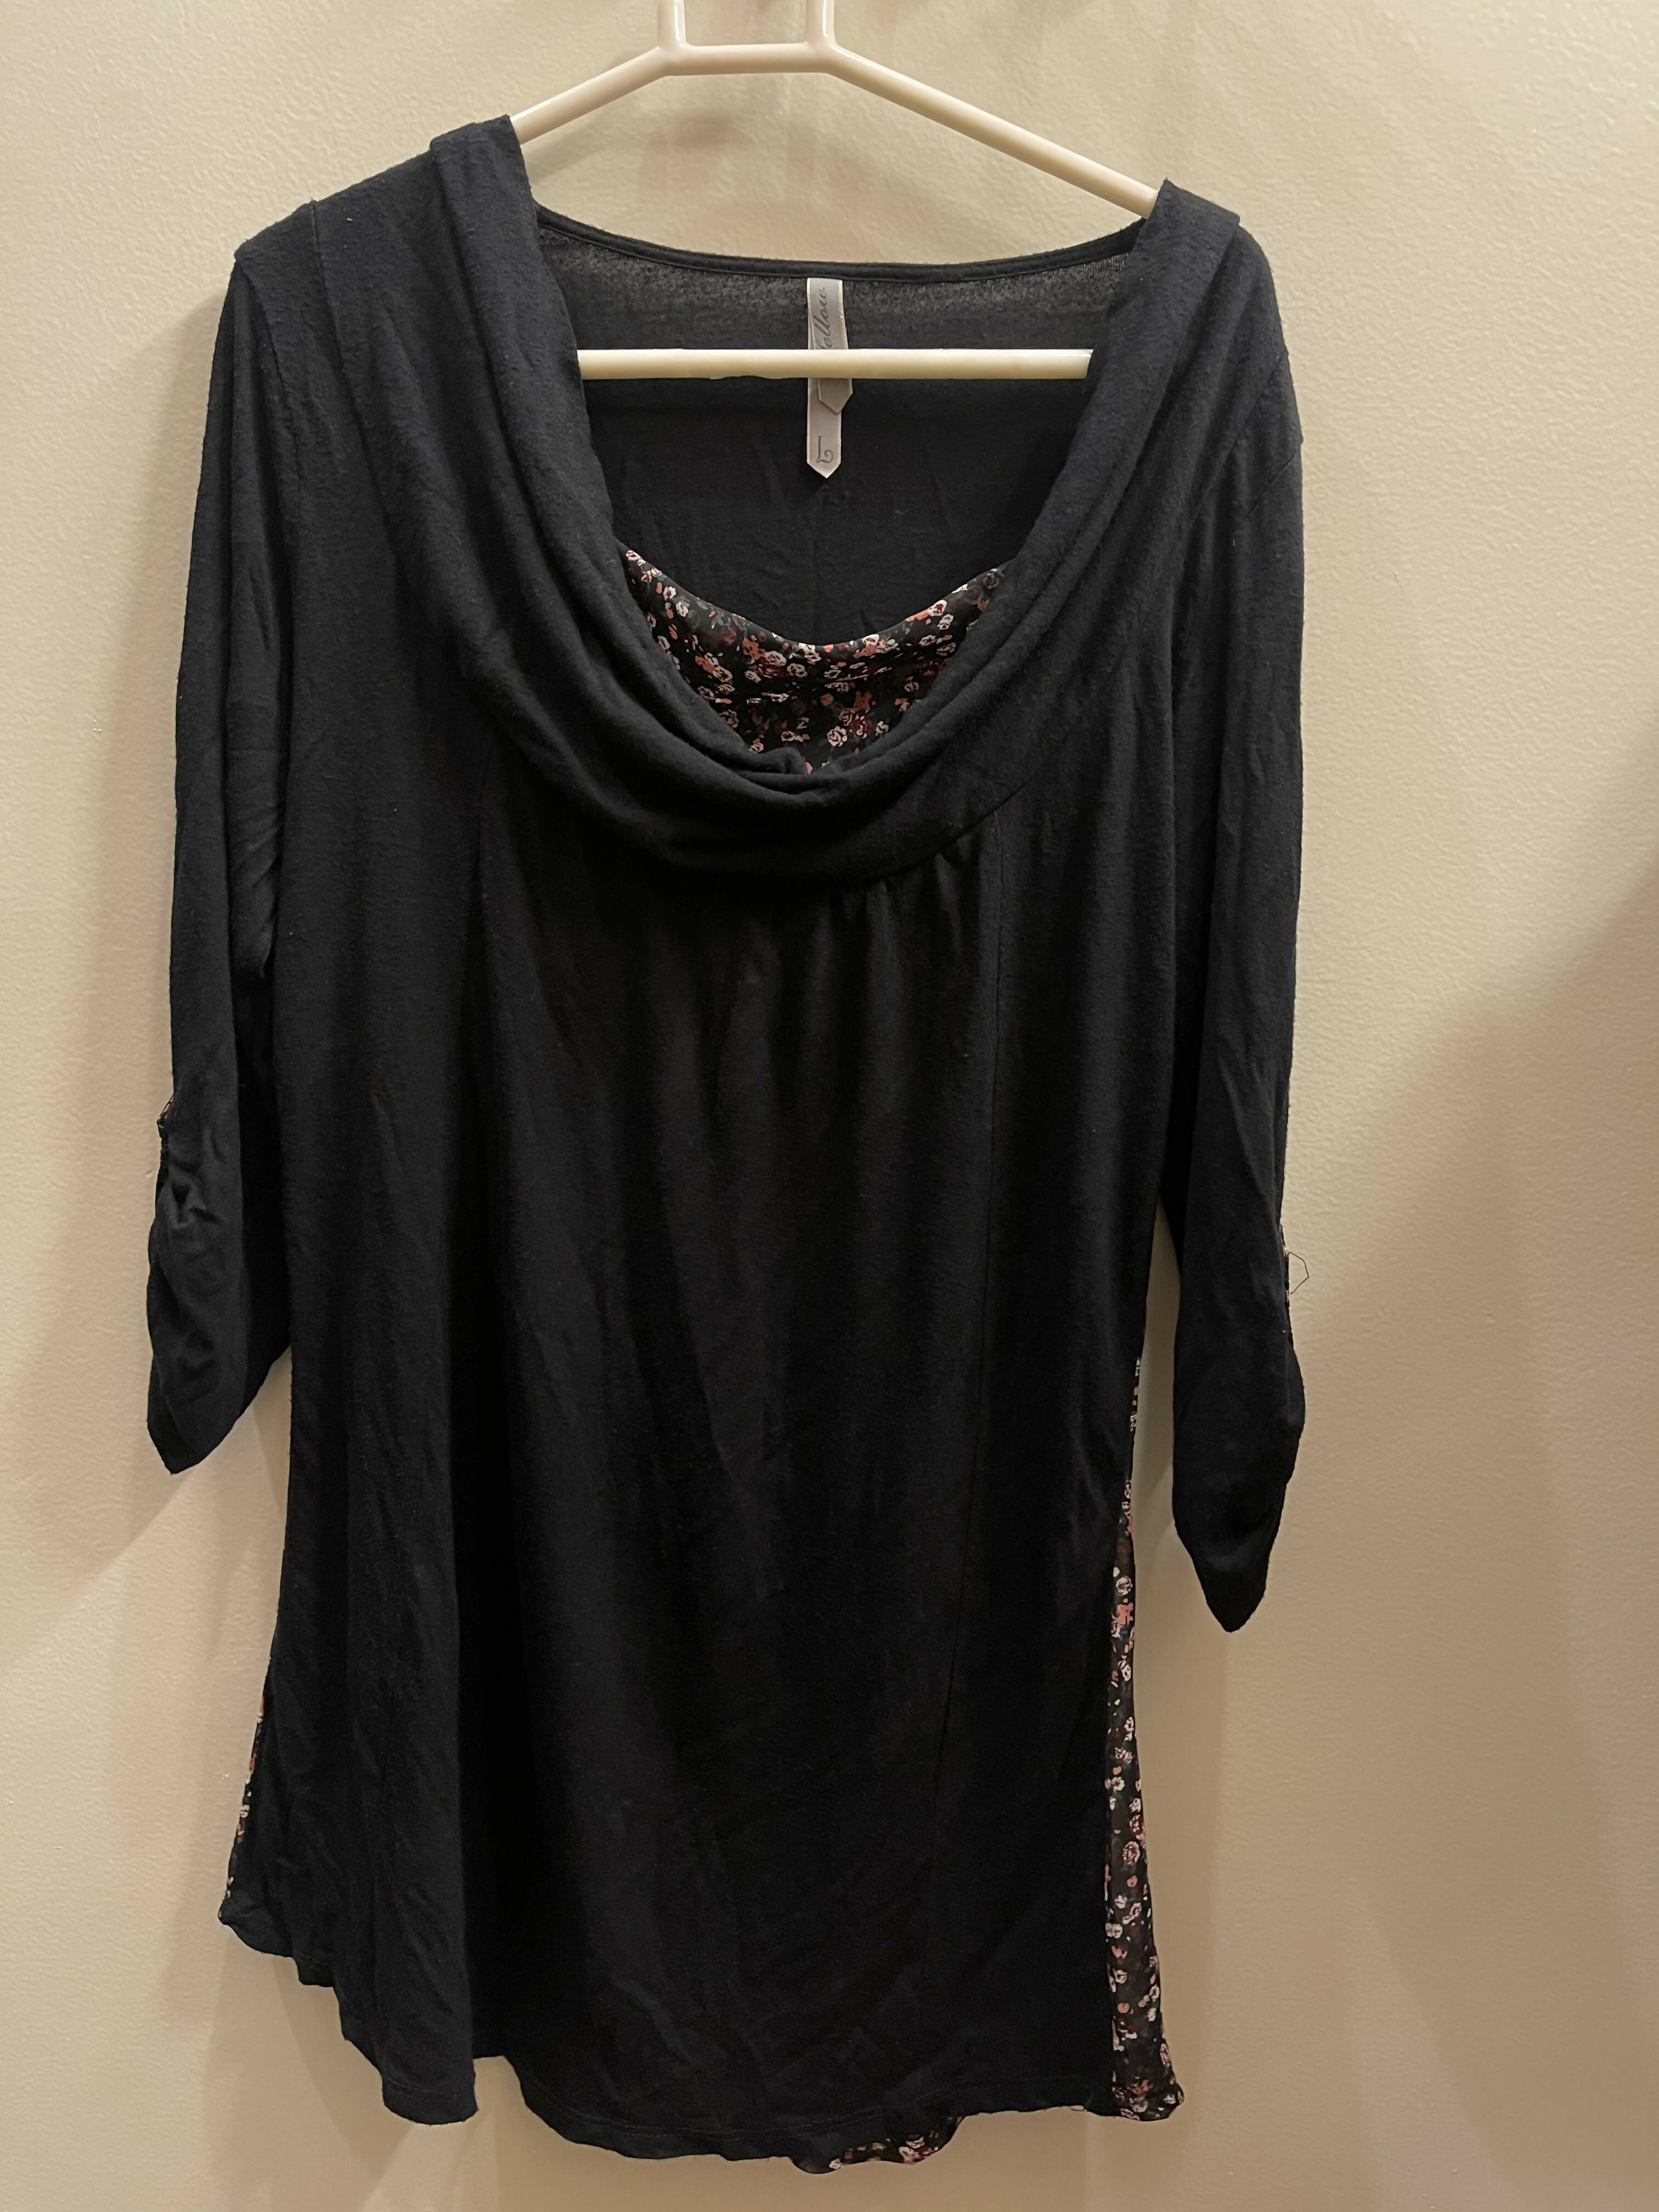 Black Top with floral | Women Tops & Shirts | Preloved